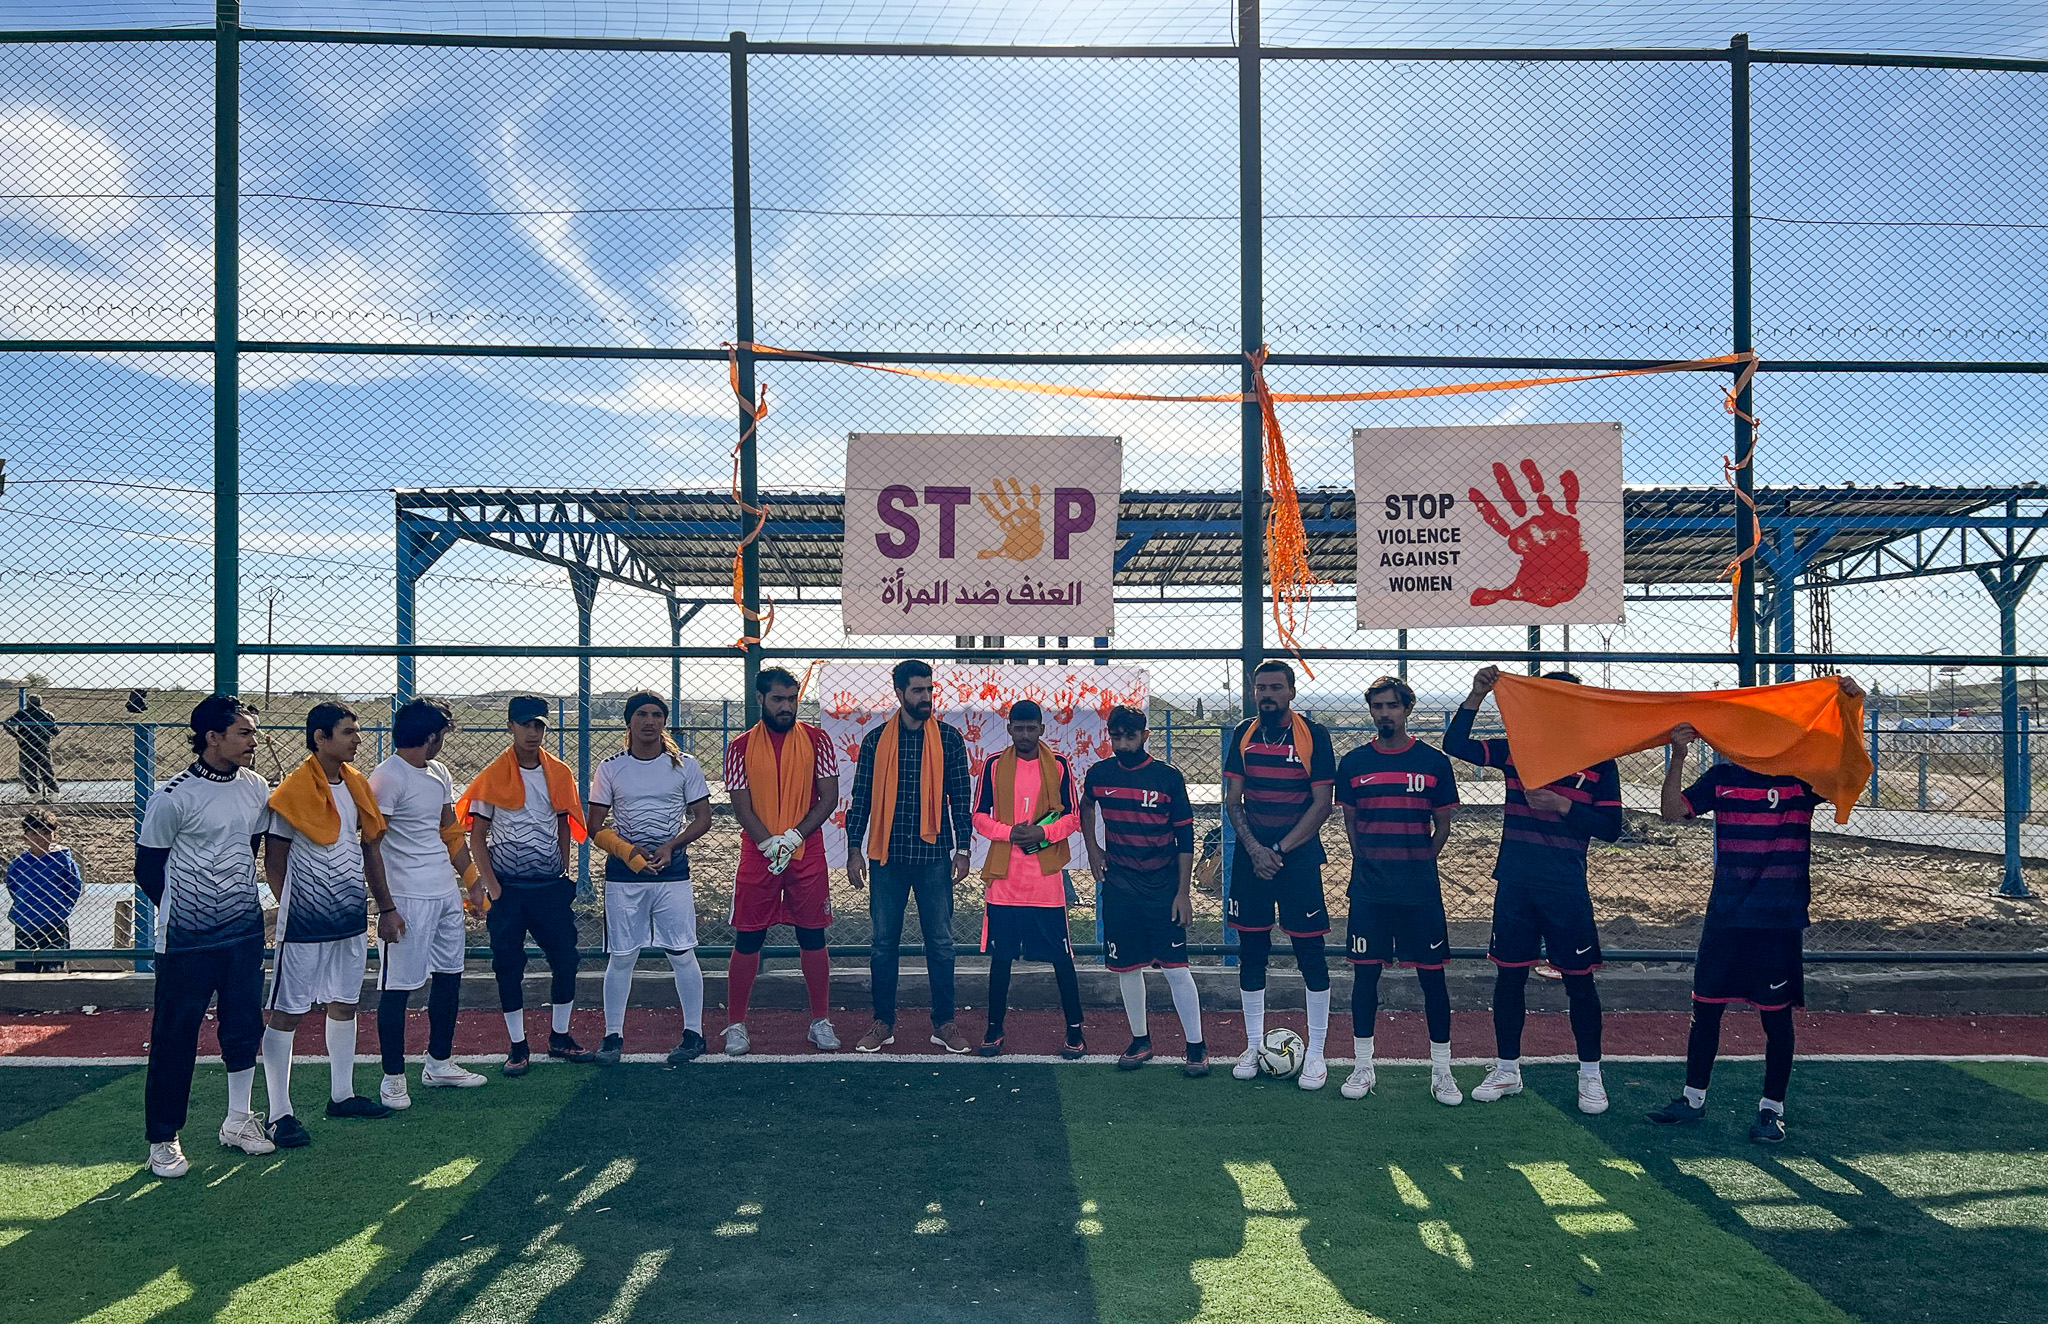 a group of young men stand on a soccer field under banners for preventing violence against women